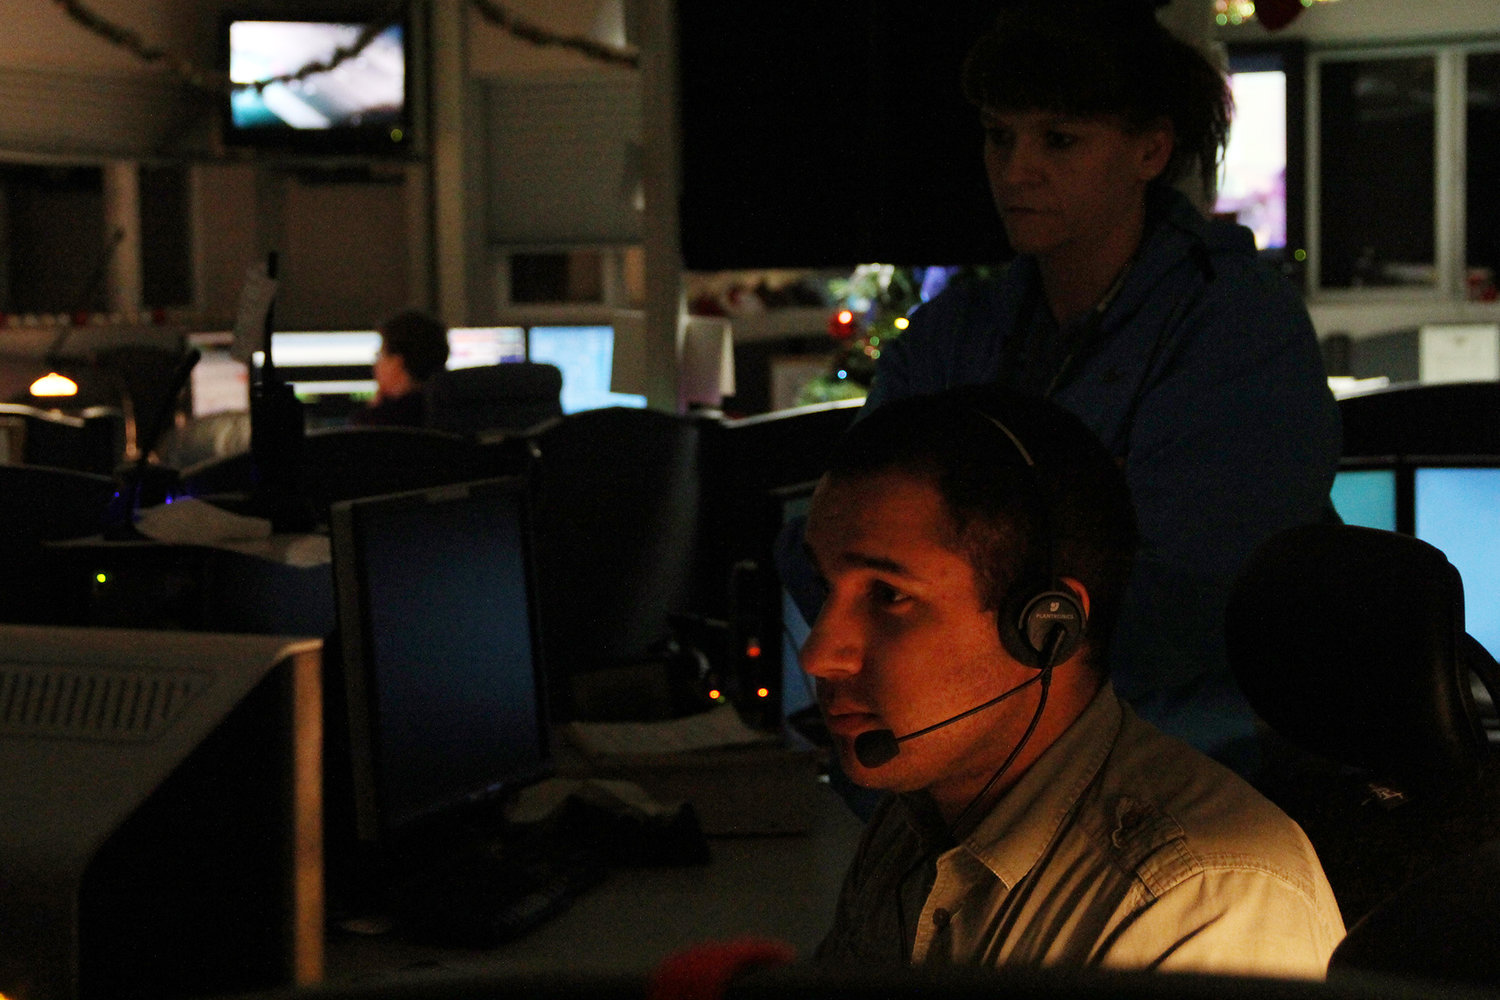 Kaylee Osowski / kosowski@chronline.com James Hatchett works his station at the Lewis County 911 Communications Center Thursday night in Chehalis as a coworker looks on. Hatchett began working at the center in July.